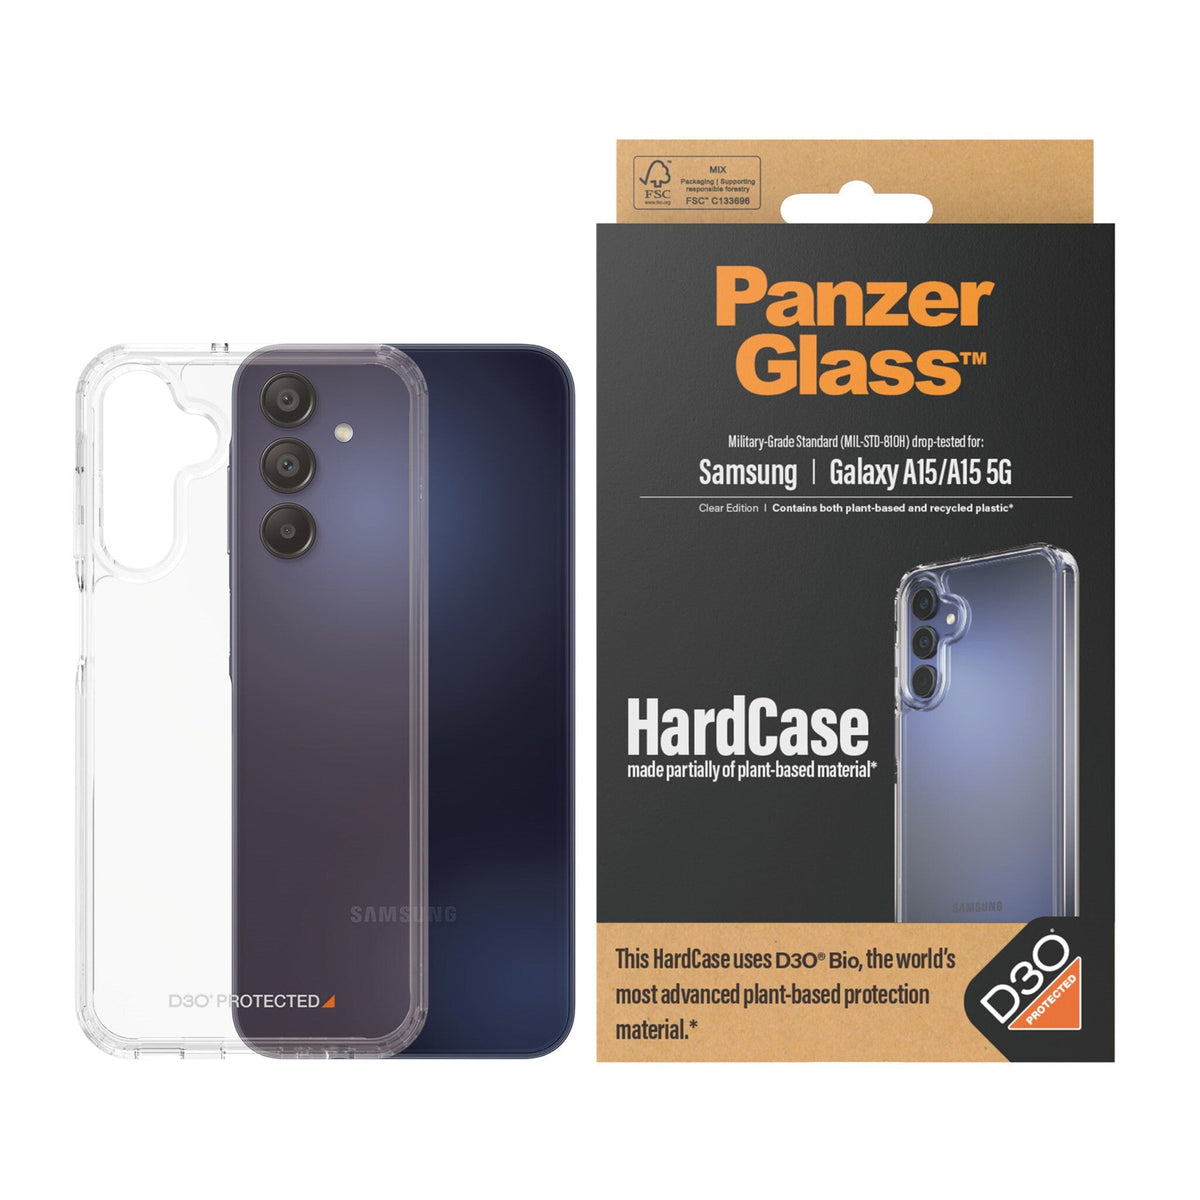 PanzerGlass ® Hardcase with D30 for Galaxy A15 / A15 (5G) in Transparent